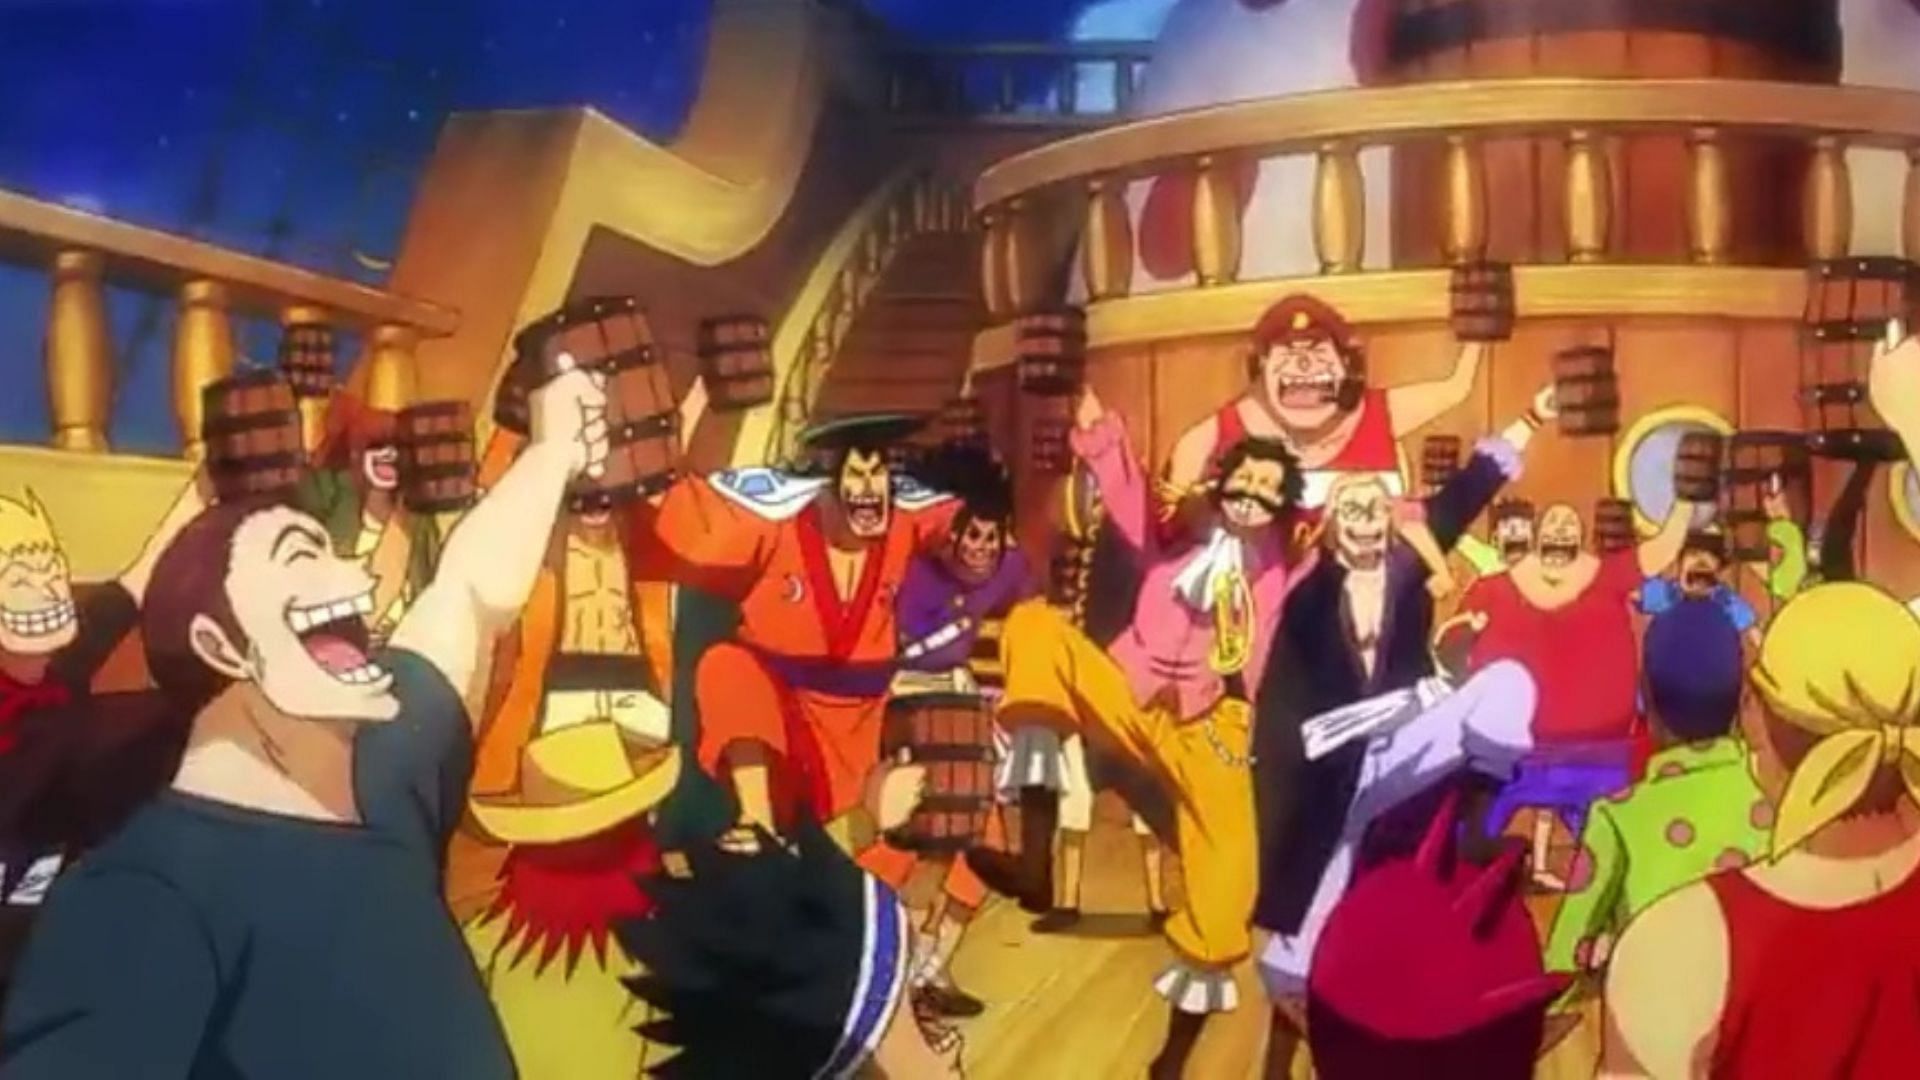 Roger Pirates as seen in the One Piece anime (Image via Toei Animation)